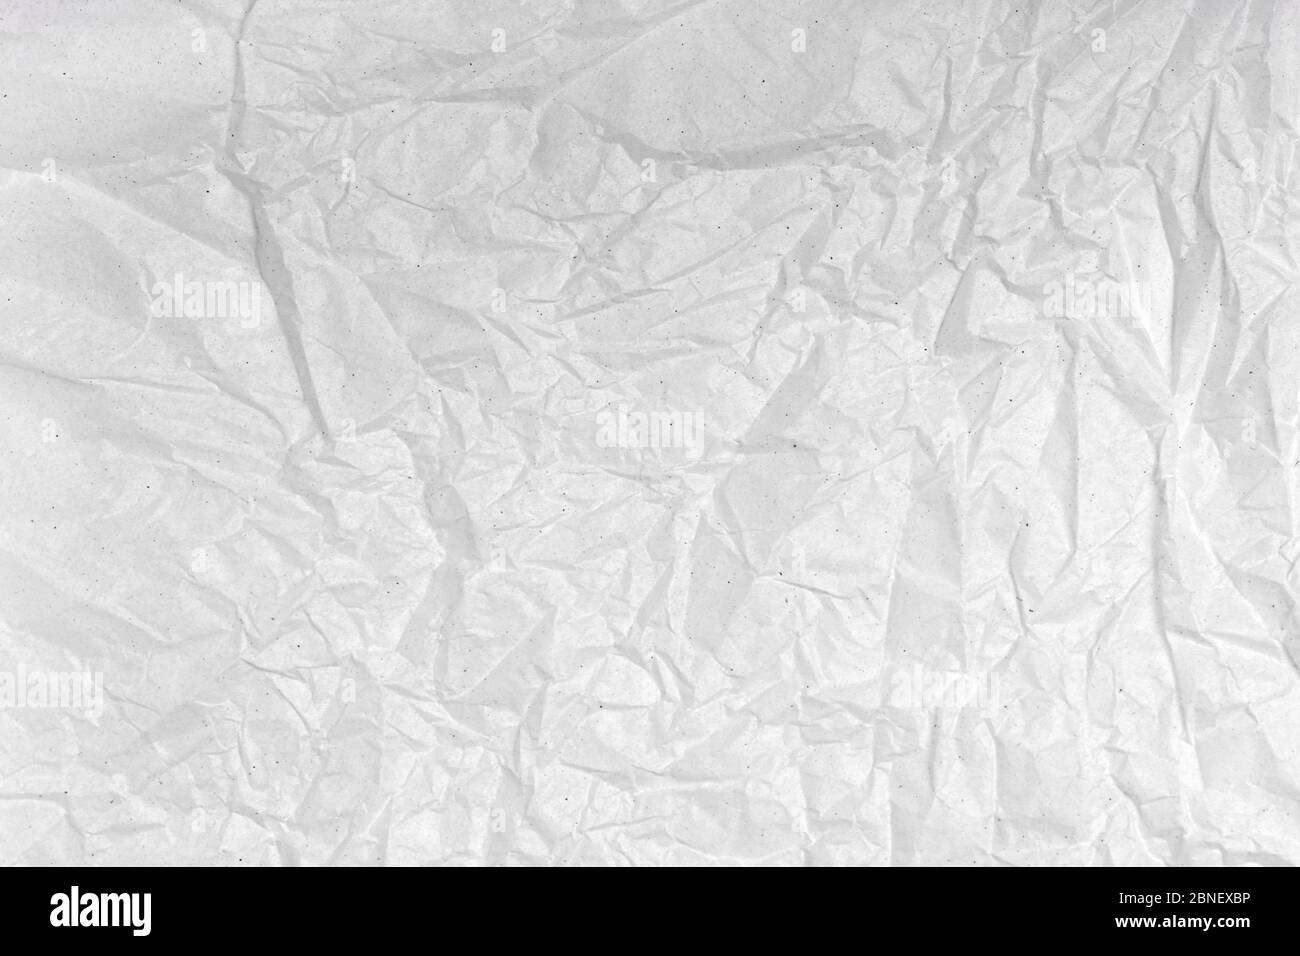 Paper texture. Gray paper sheet. White paper background blank creased  crumpled posters placard grunge textures surface backdrop flat lay, top  view Stock Photo